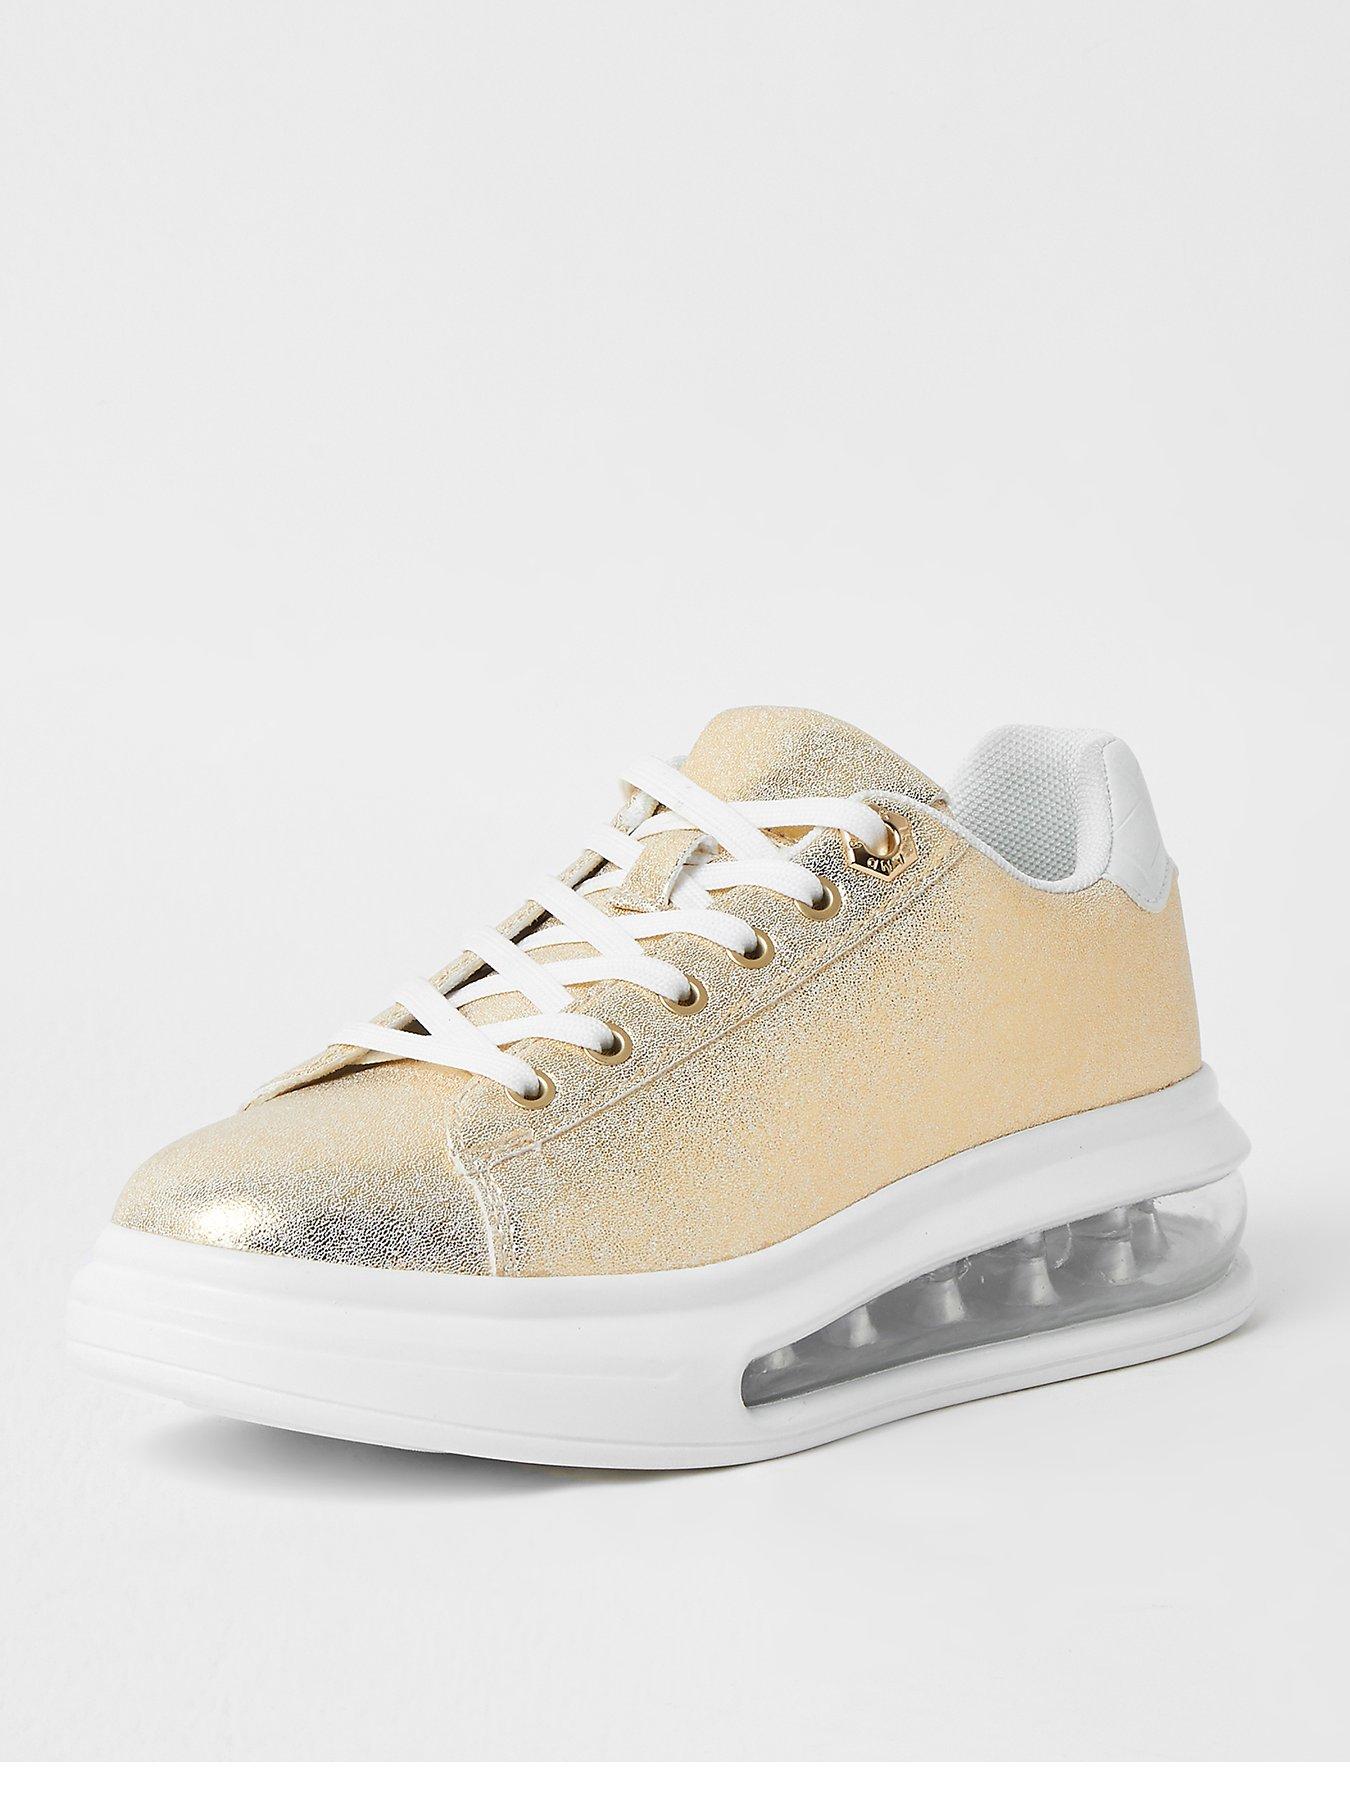 very river island trainers